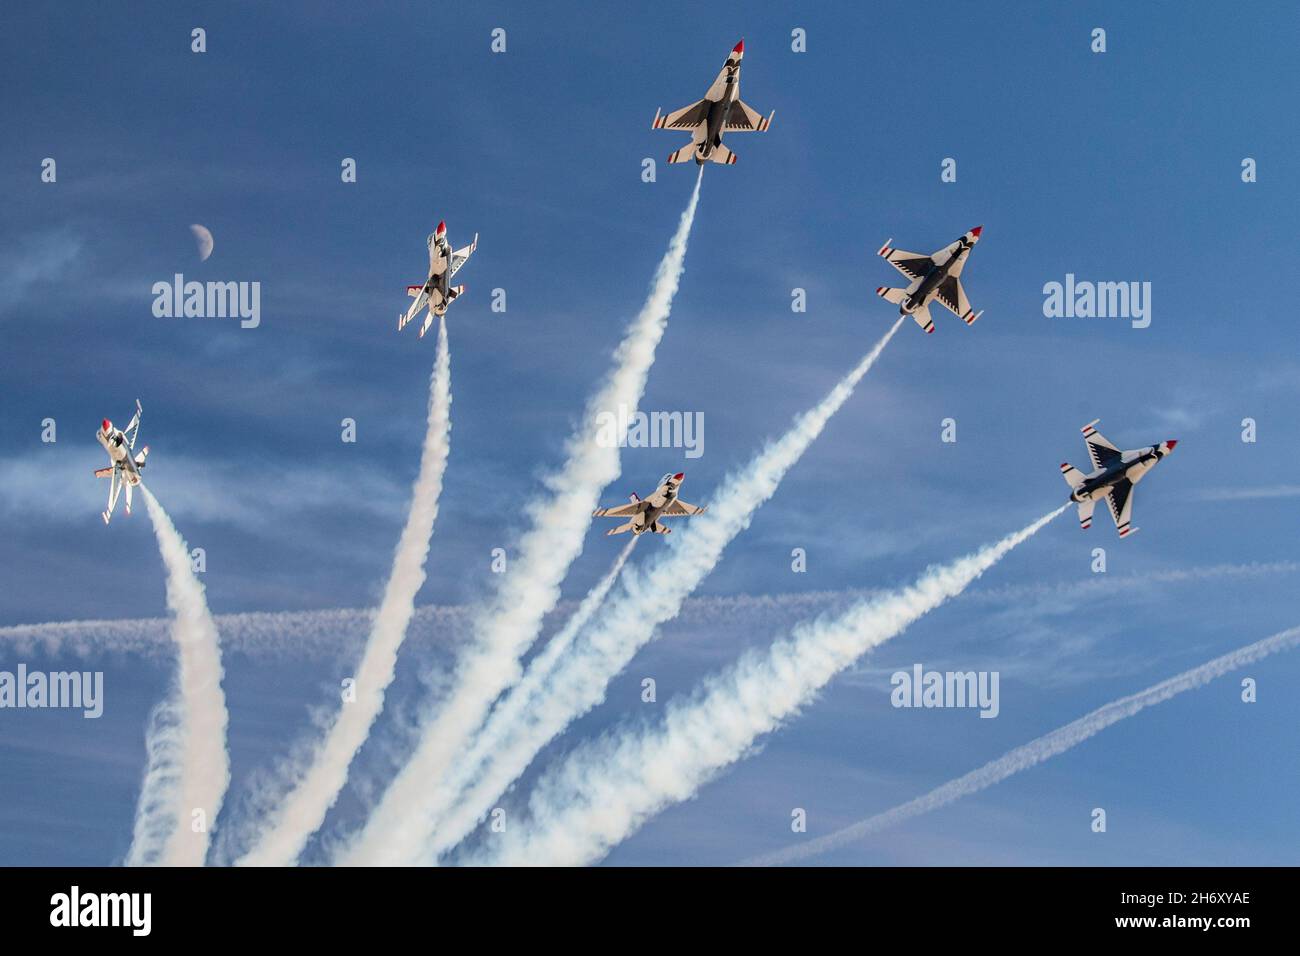 Las Vegas, Nevada, USA. 10th Nov, 2021. The USA Air Force Air Demonstration Squadron 'Thunderbirds' perform a high show practice before their final demonstration of the 2021 season on November 10, 2021, at Nellis Air Force Base, Nevada. The team has several iterations of their demo to accommodate different weather and visibility conditions. Credit: U.S. Air Force/ZUMA Press Wire Service/ZUMAPRESS.com/Alamy Live News Stock Photo